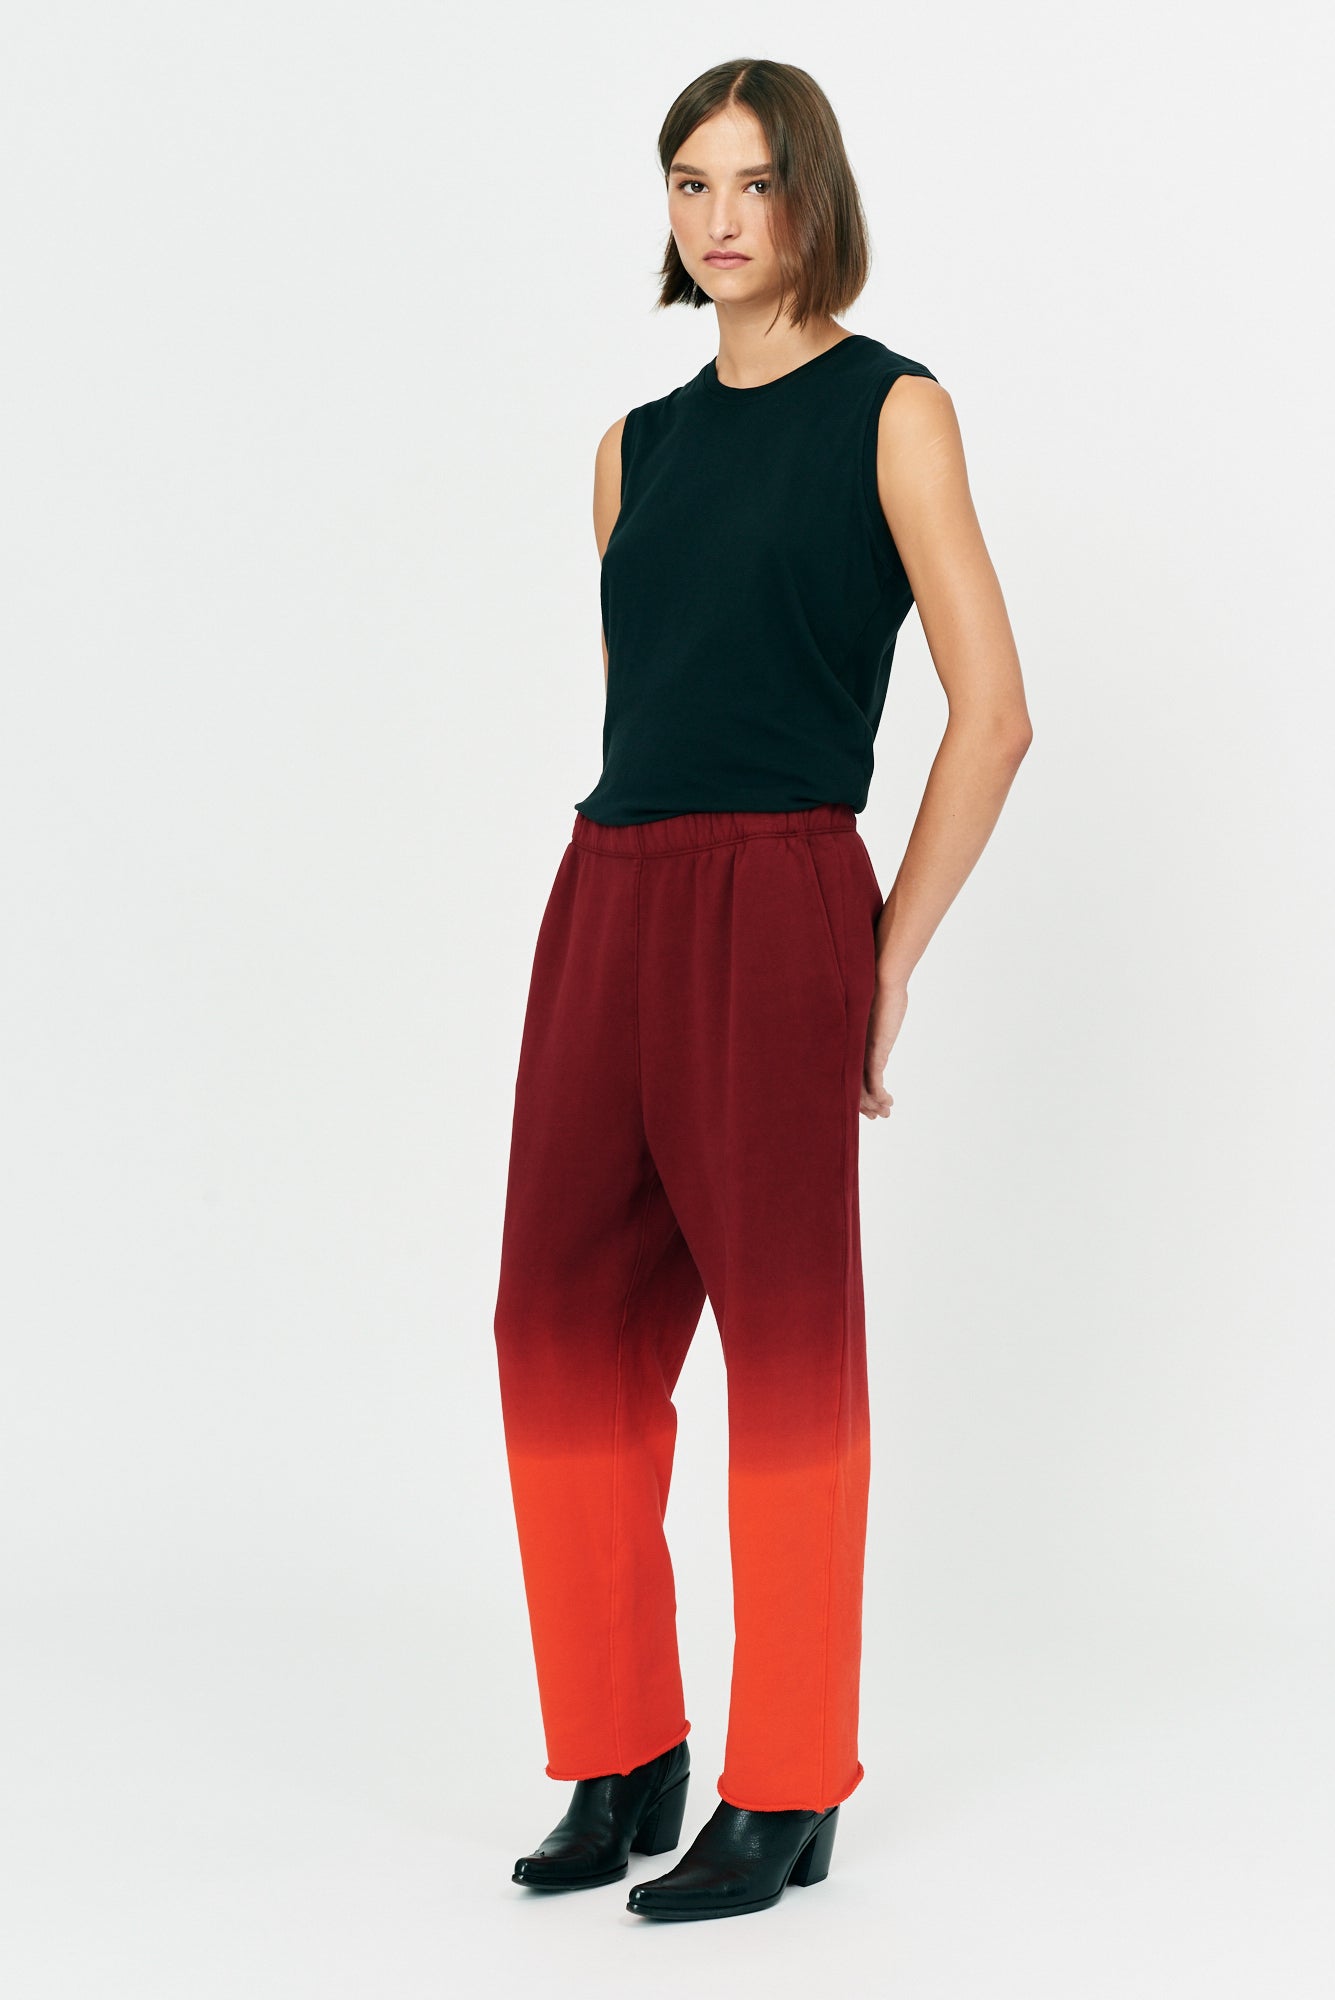 Fire Gradient Reflective Pond and Jersey Ankle Pant Full Side View